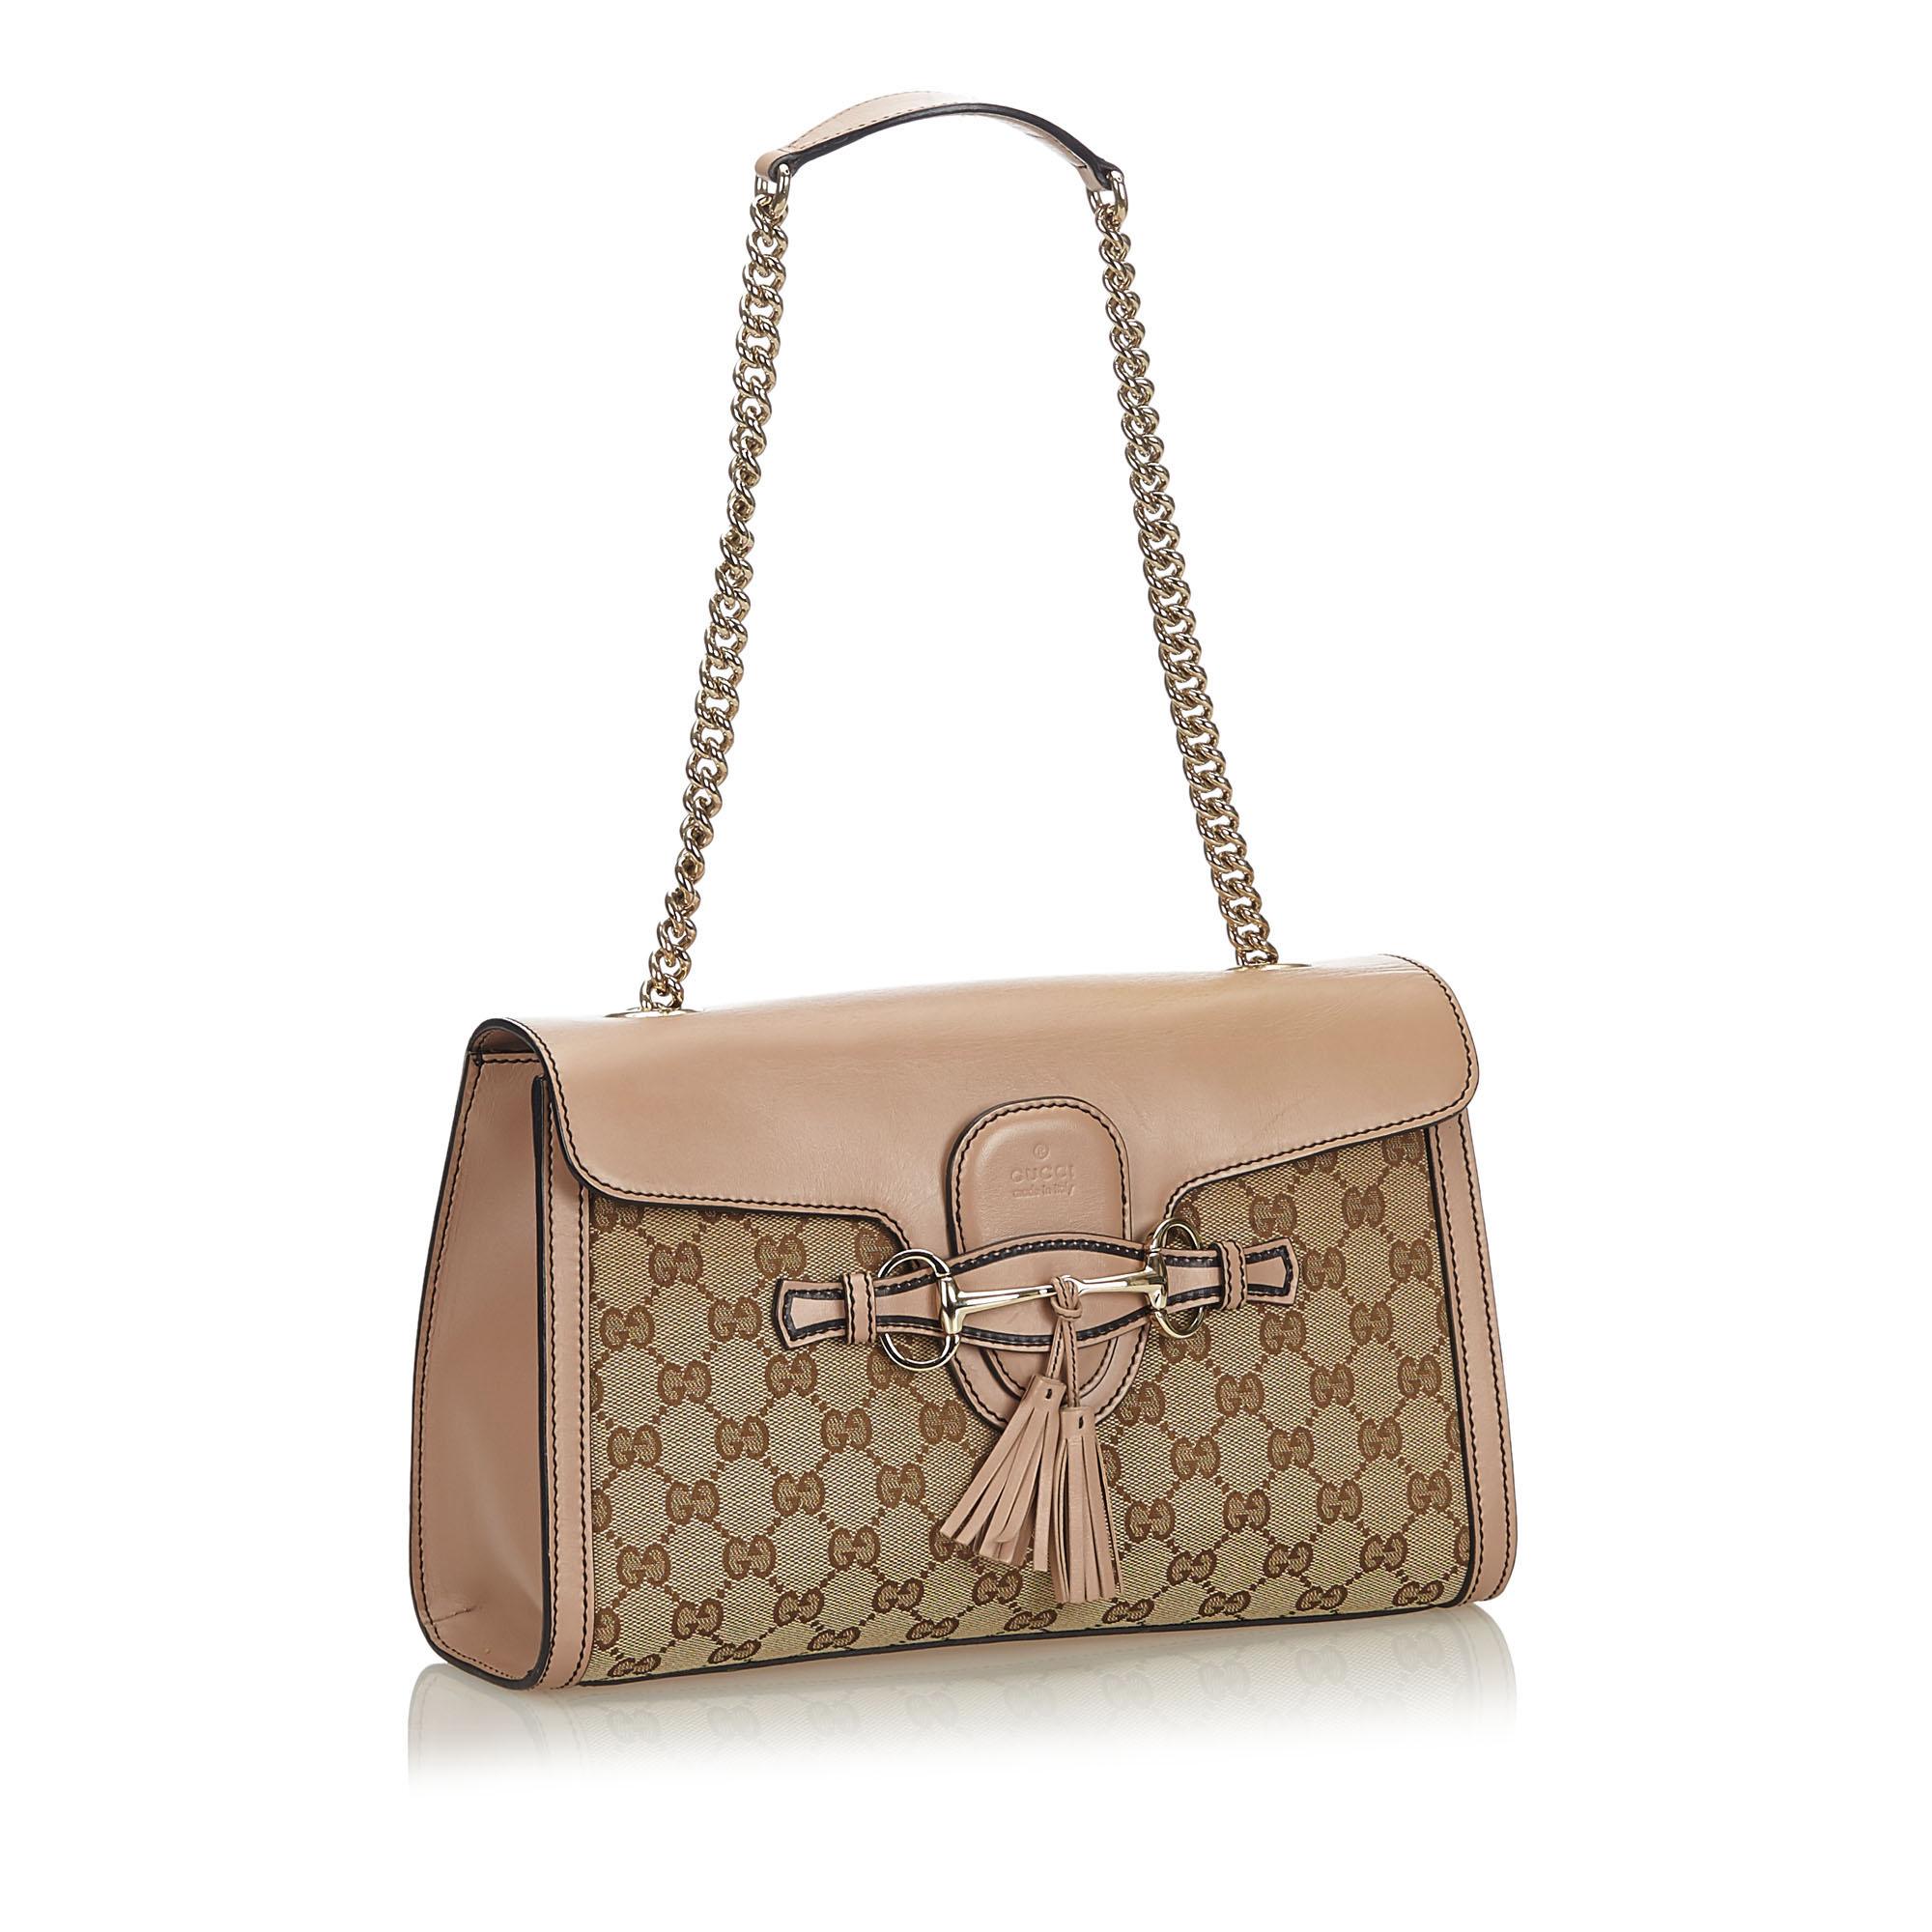 The Emily features a canvas body with leather trim, a gold-tone curb chain strap, a front flap with a tuck closure and a tassel detail, and interior slip pockets. It carries as B+ condition rating.

Inclusions: 
Dust Bag
Dimensions:
Length: 20.00